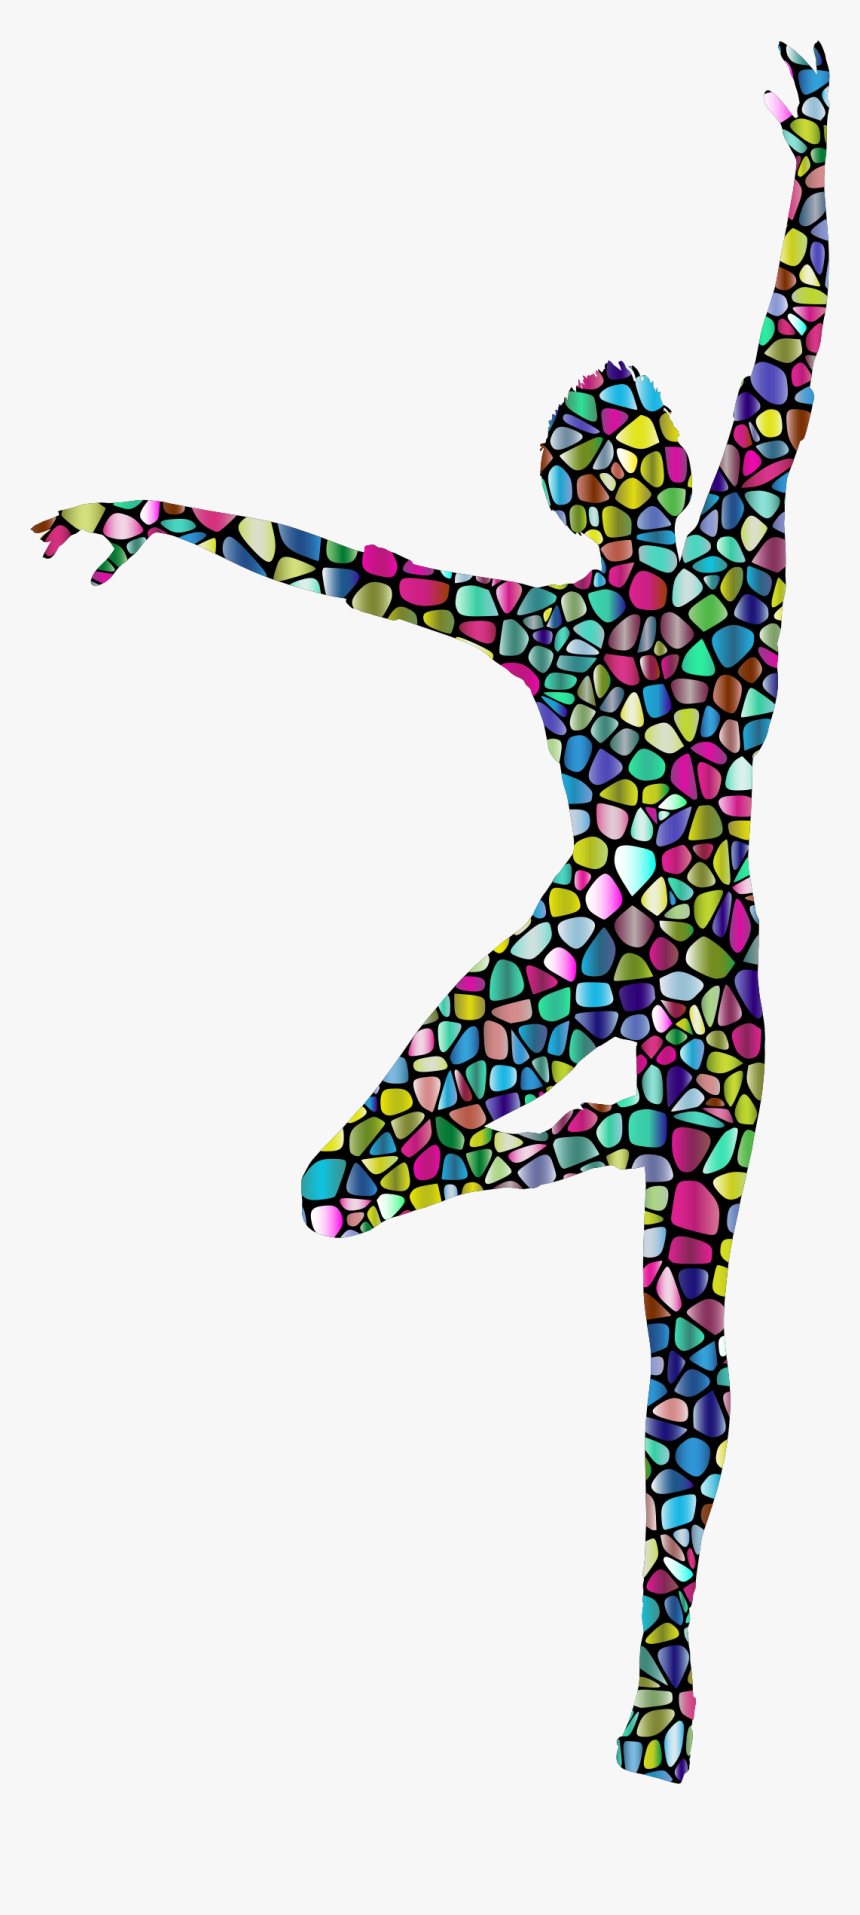 Polyprismatic Tiled Dancing Woman Silhouette With Background - Colorful Dancer Silhouette Transparent Background, HD Png Download, Free Download